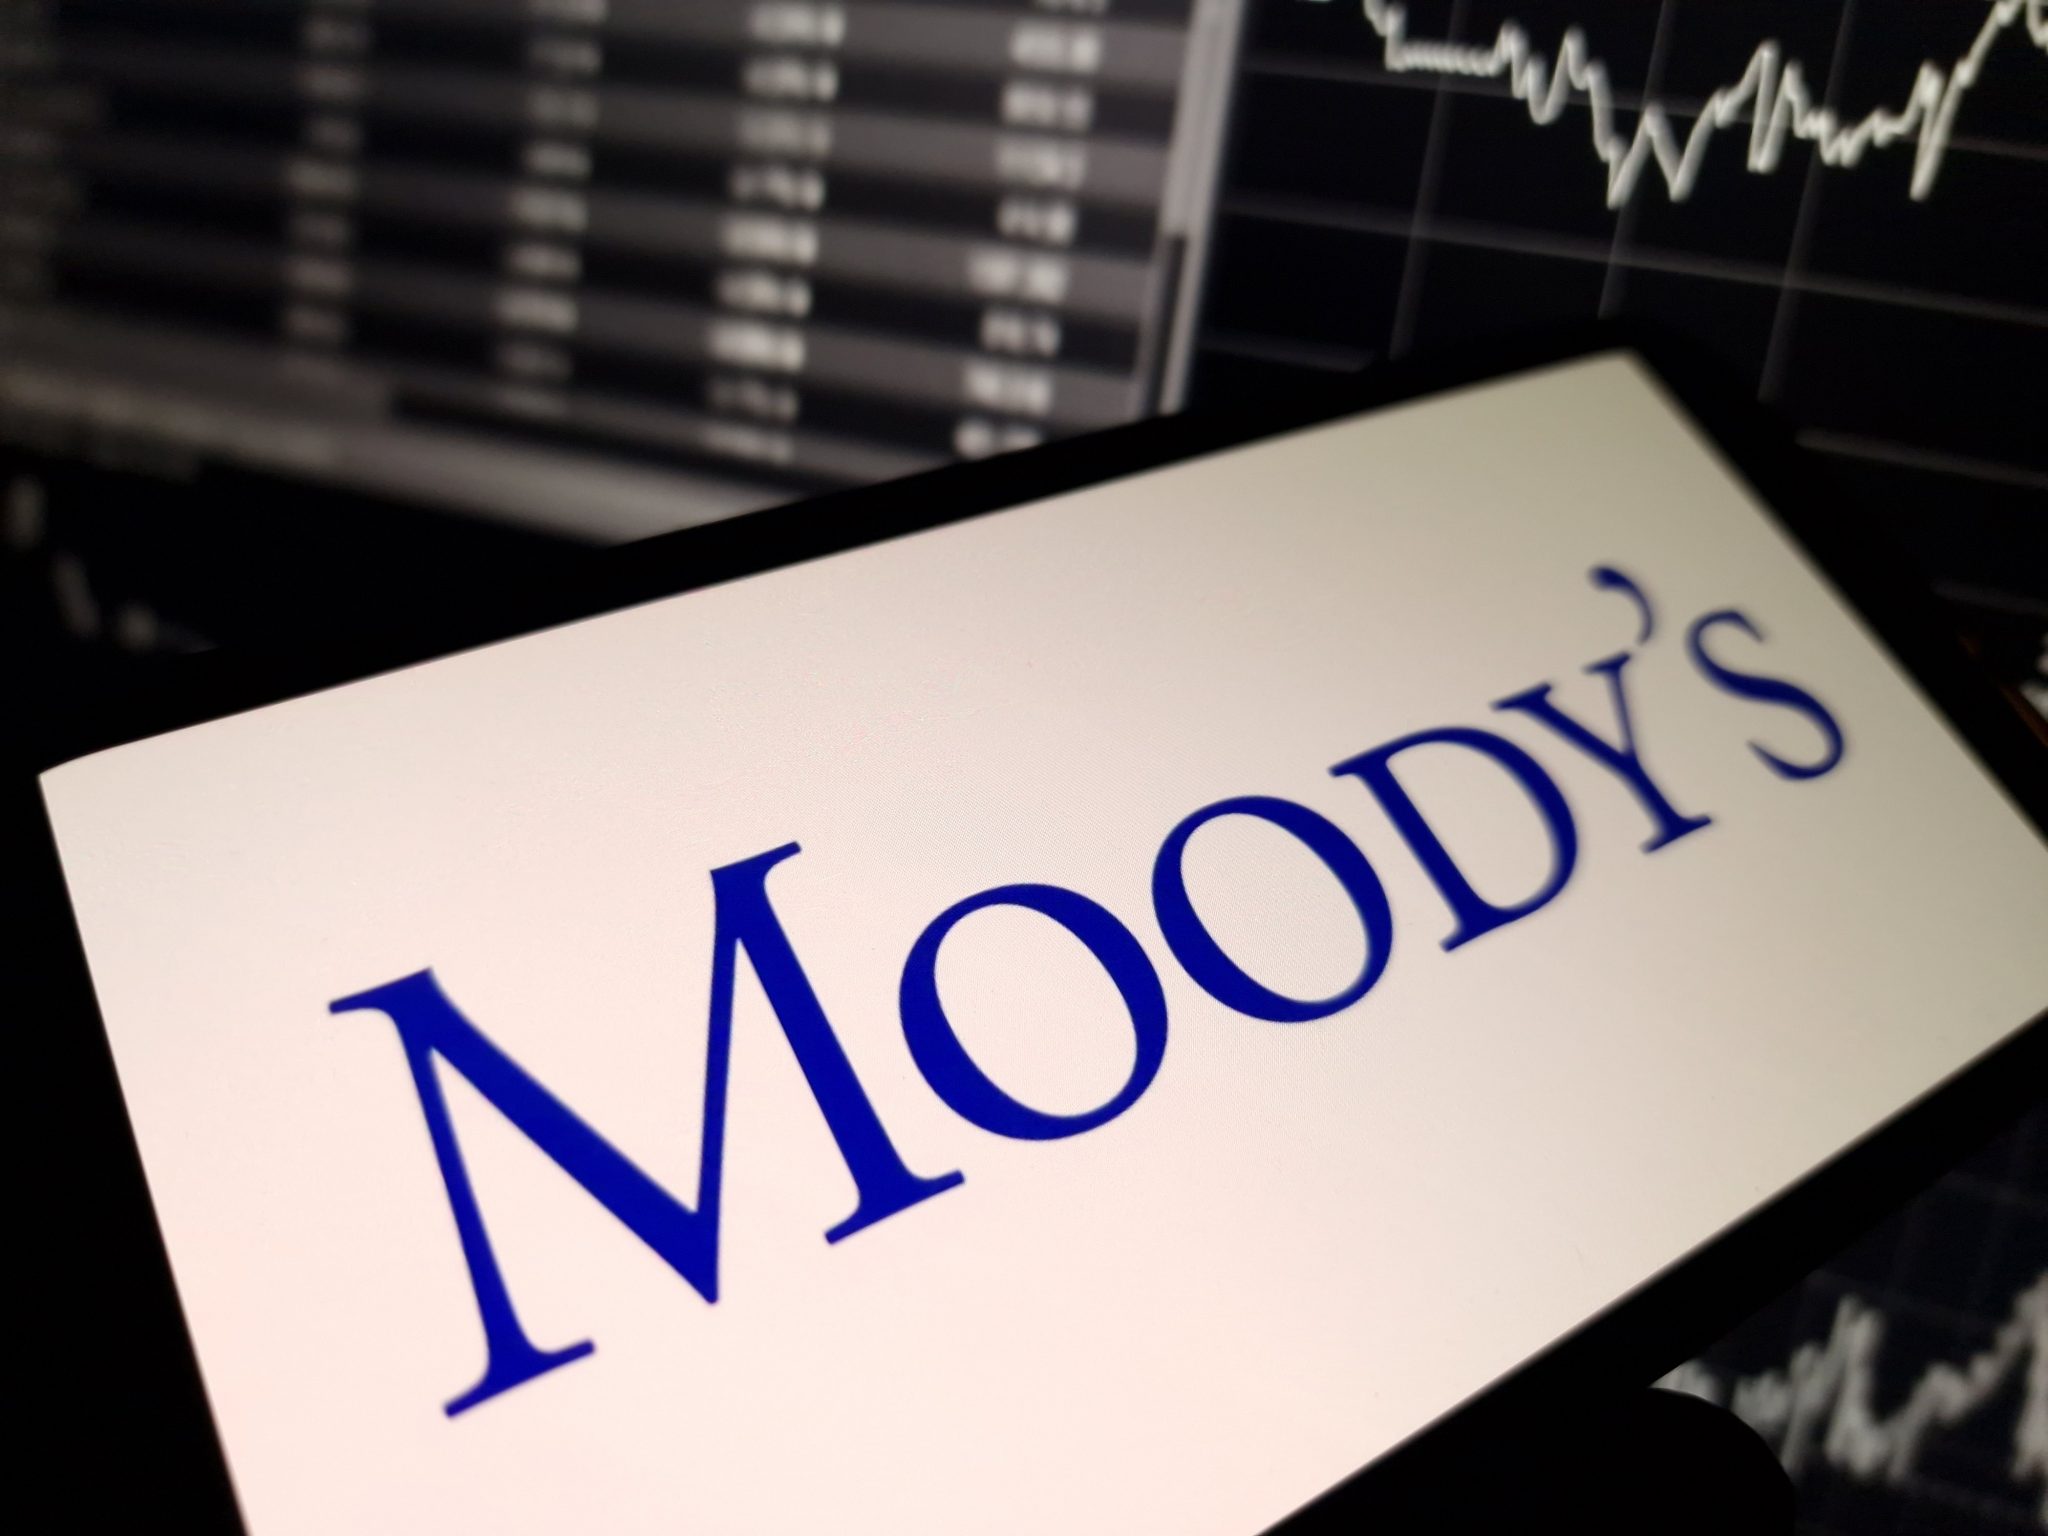 Moody’s Note Lauds Greek Banks, Ahead of the Credit Agency’s Mar. 15 Evaluation